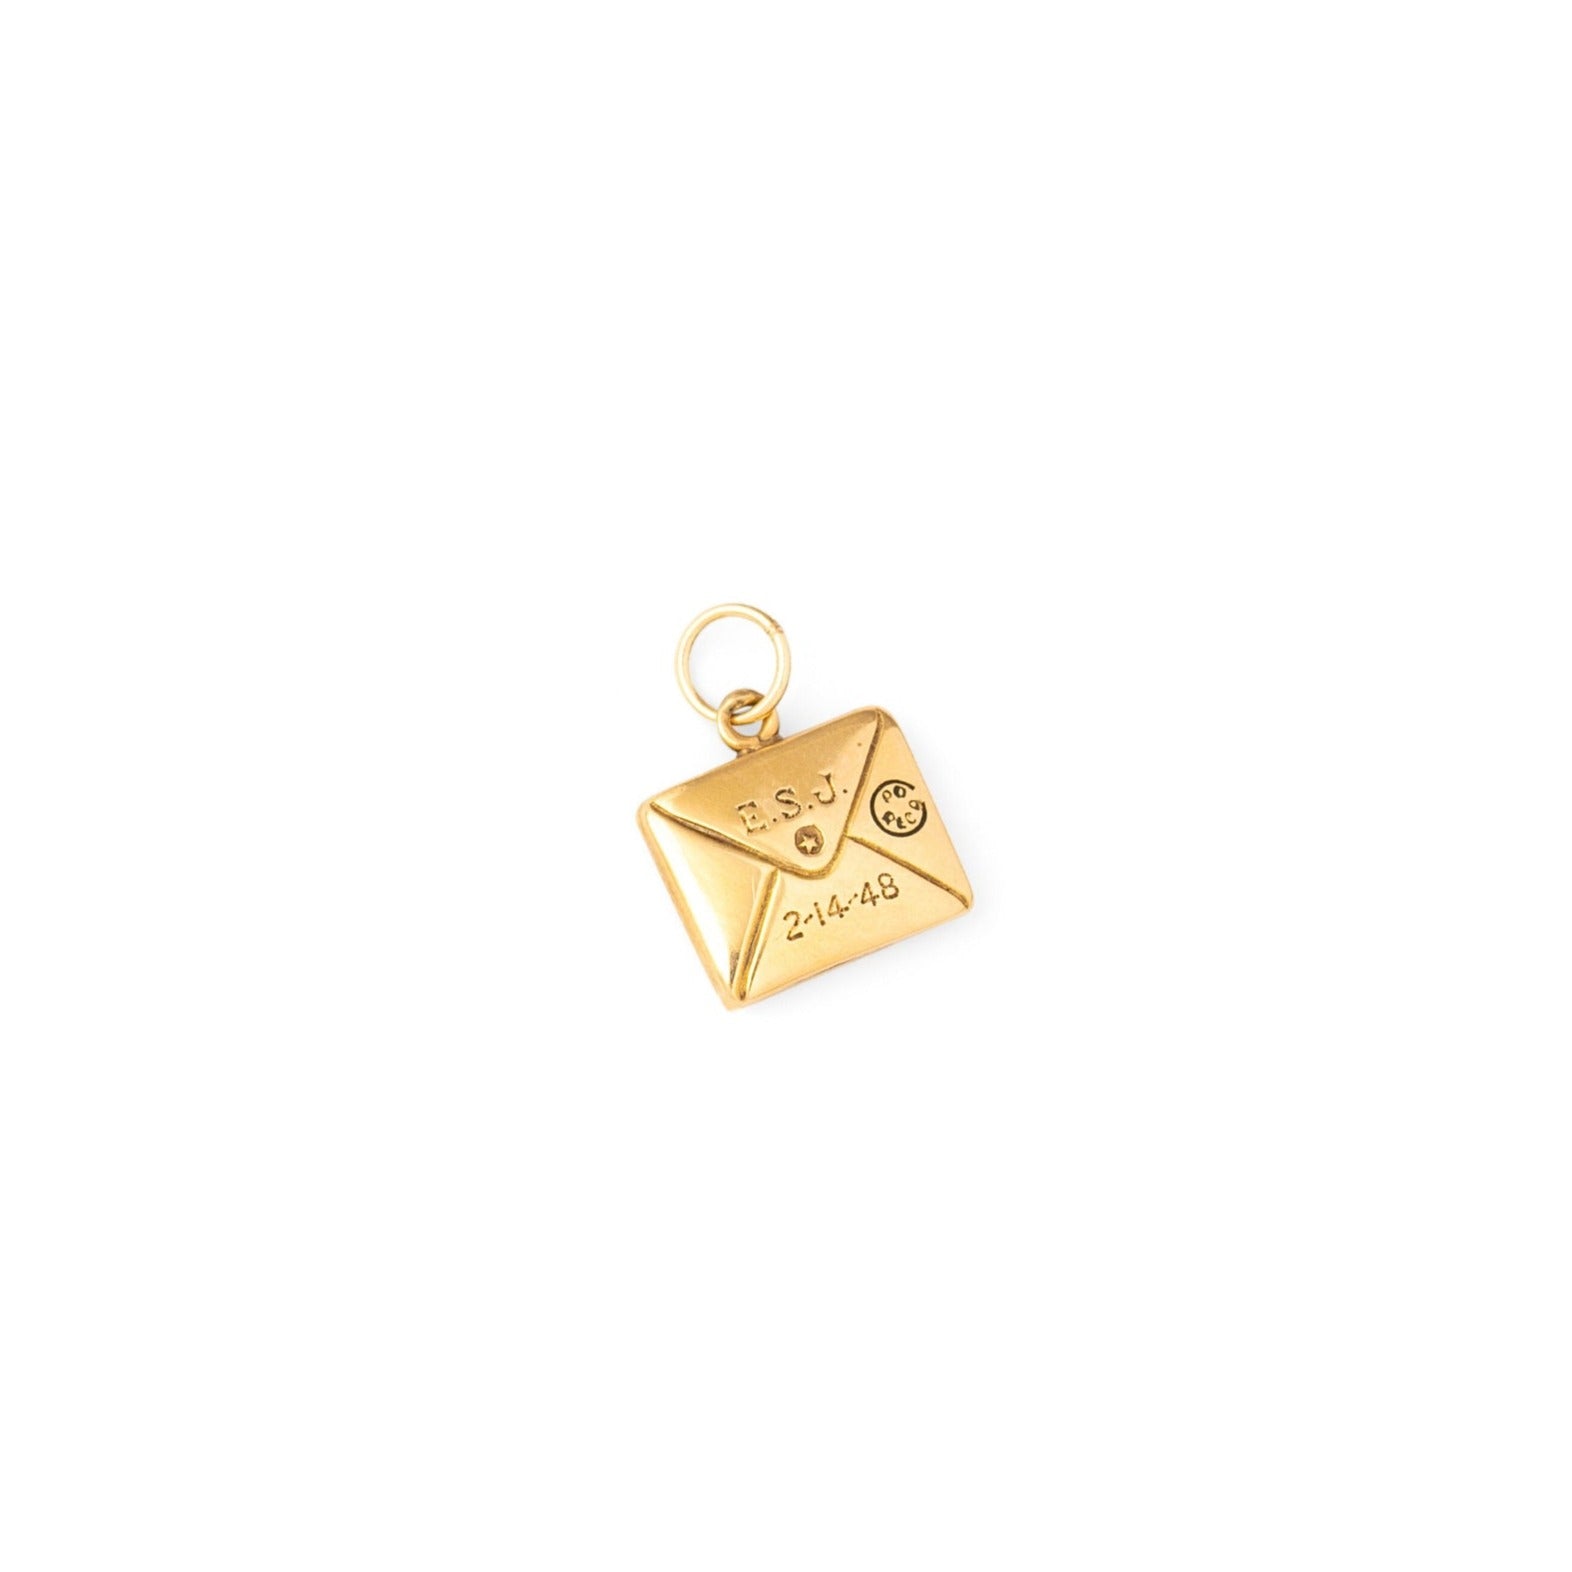 "Romeo To Juliet" Love Letter 14k Gold and Enamel Charm